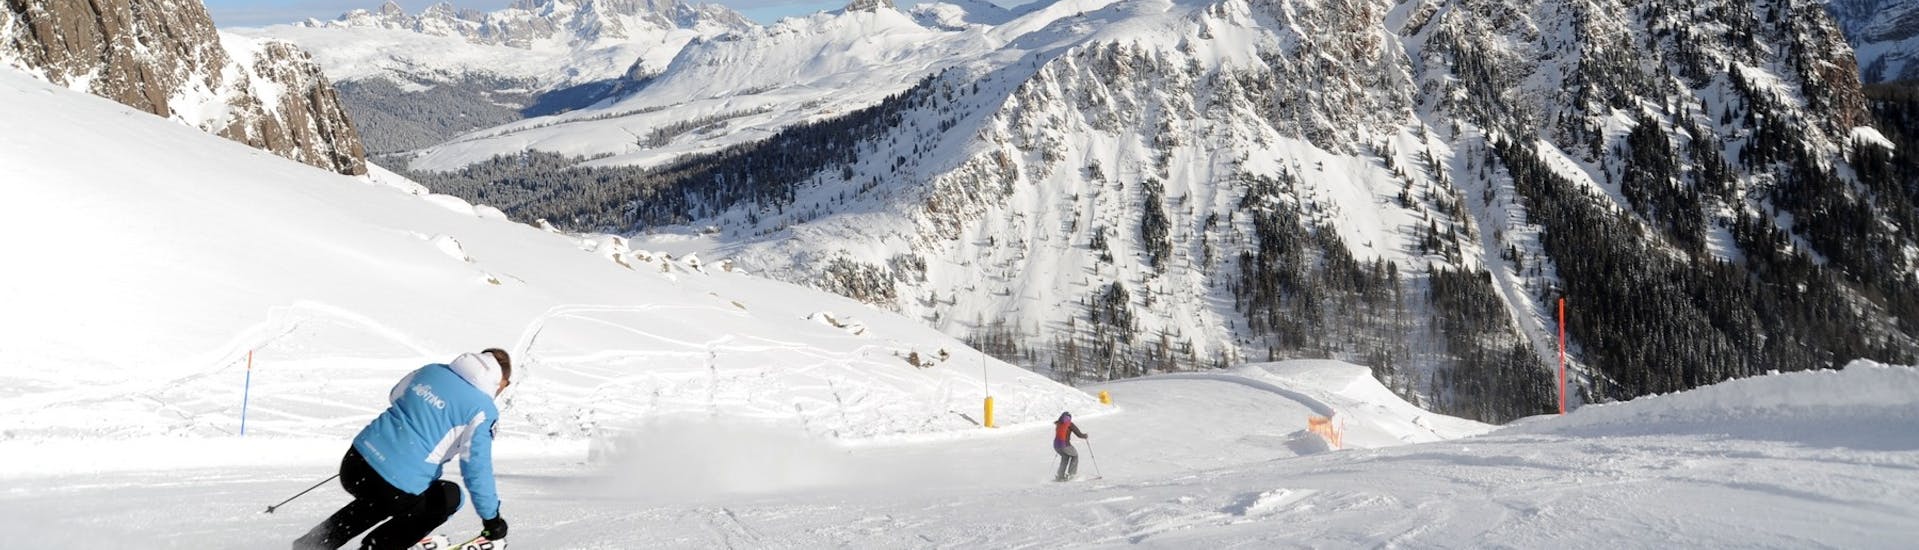 People skiing on the slopes of San Martino di Castrozza during the Private Ski Lessons for Adults of All Levels with Scuola Italiana Sci Dolomiti San Martino di Castrozza.